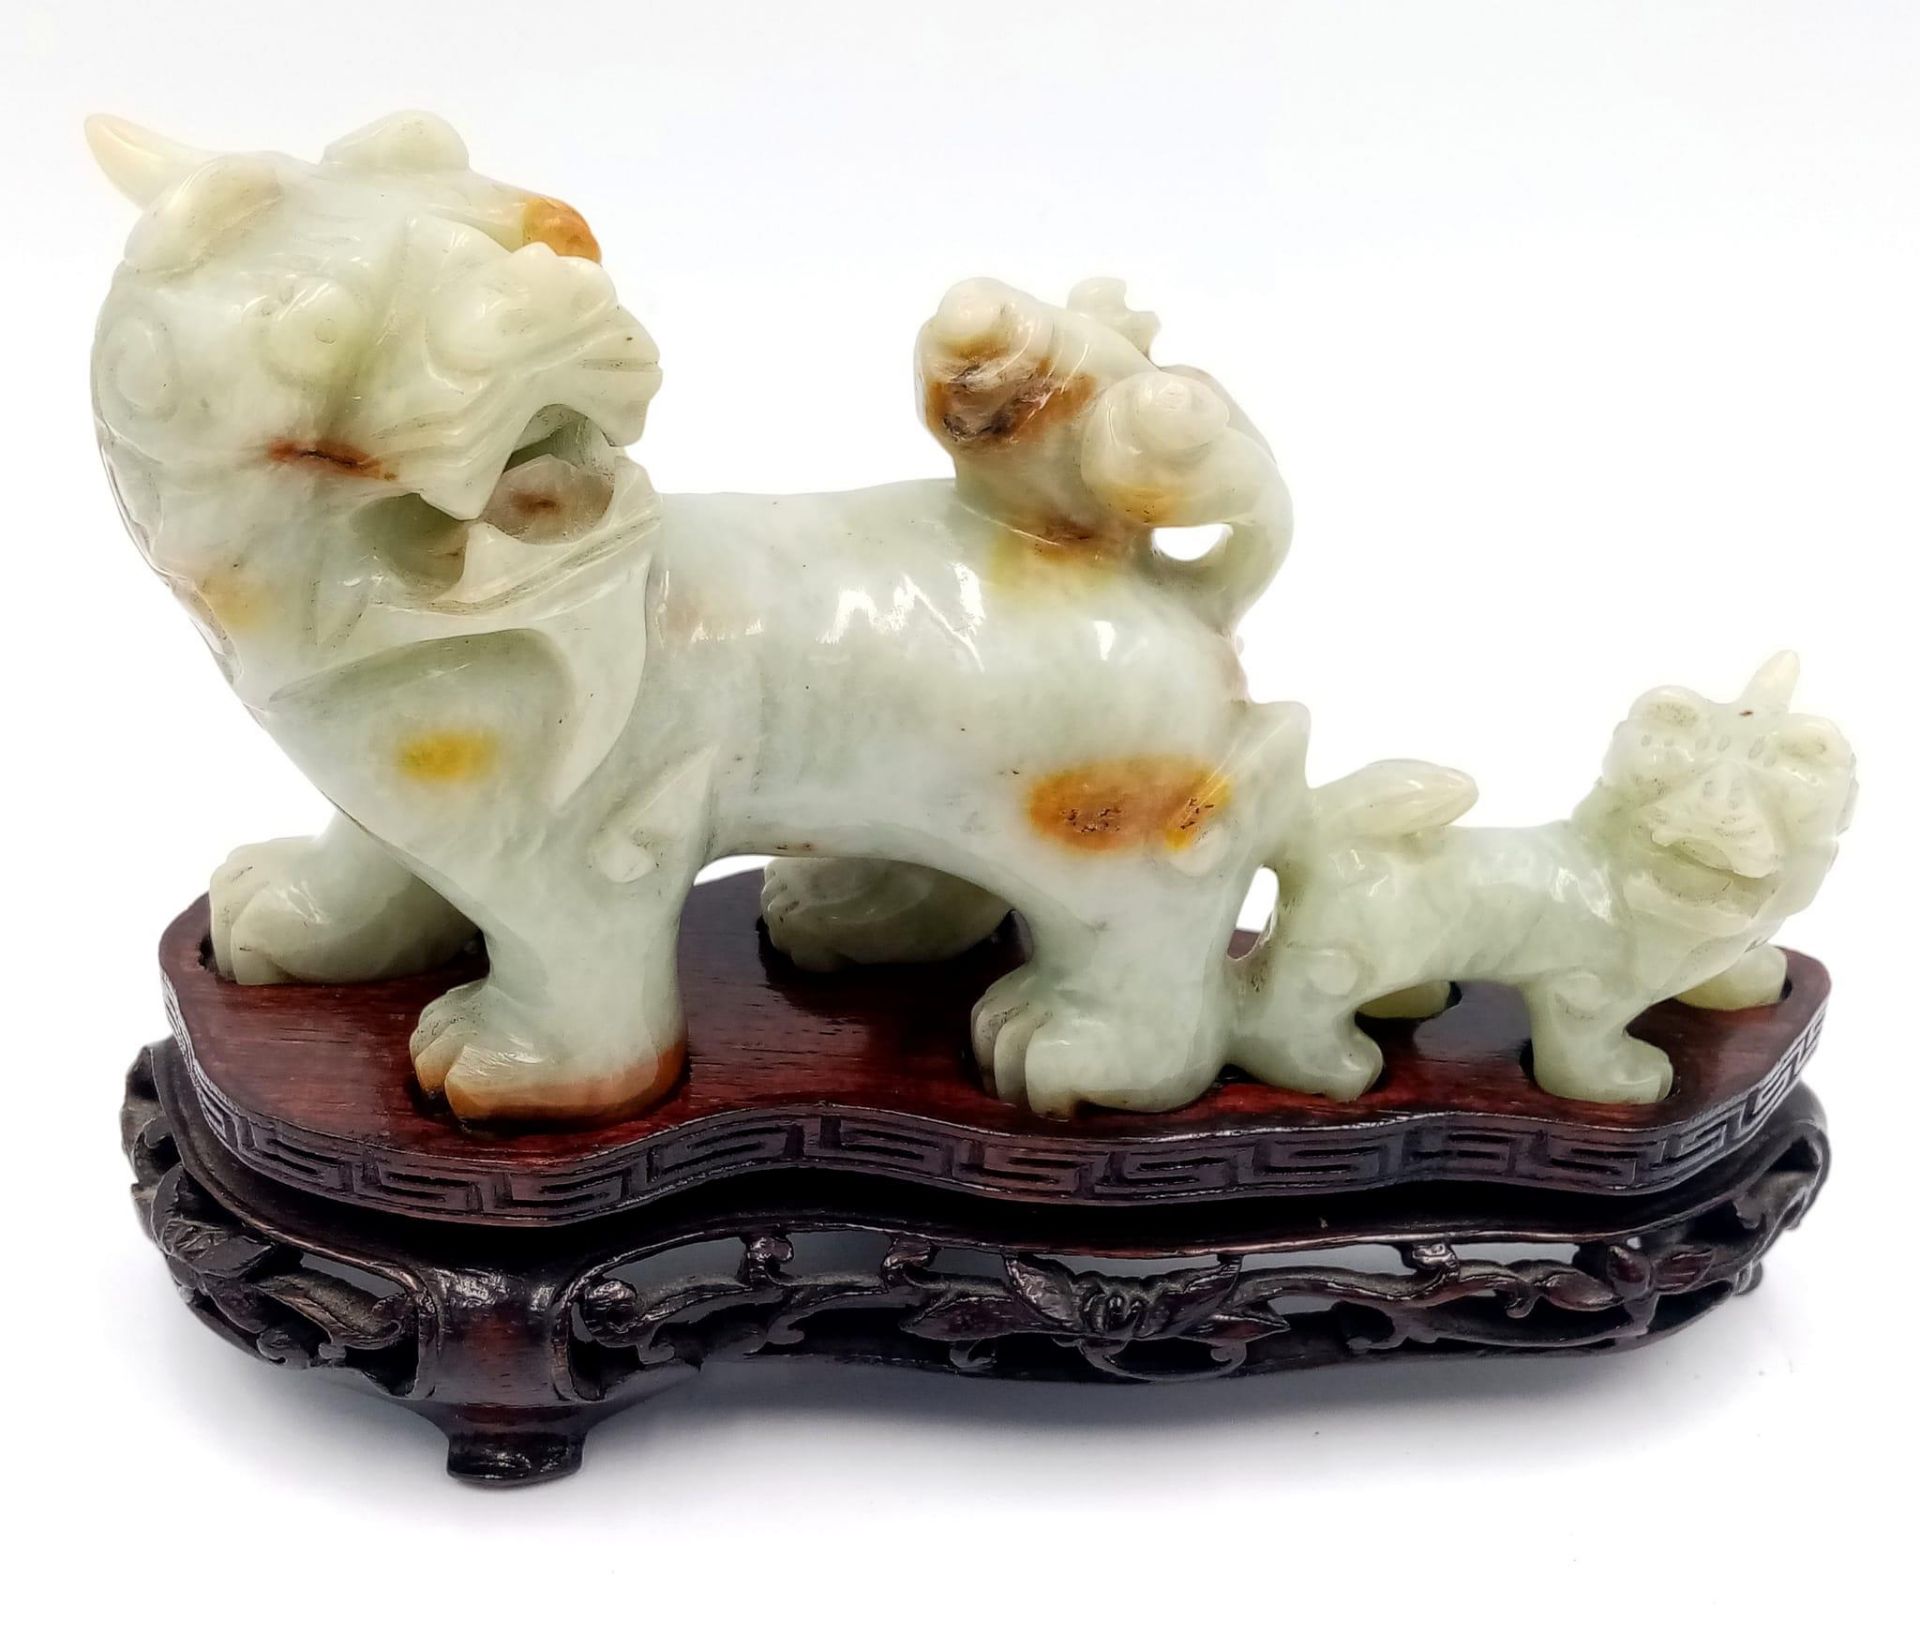 A Glorious Antique Chinese Hand-Carved Jade Fu Lion Figure - Sits on a bespoke lacquered wooden